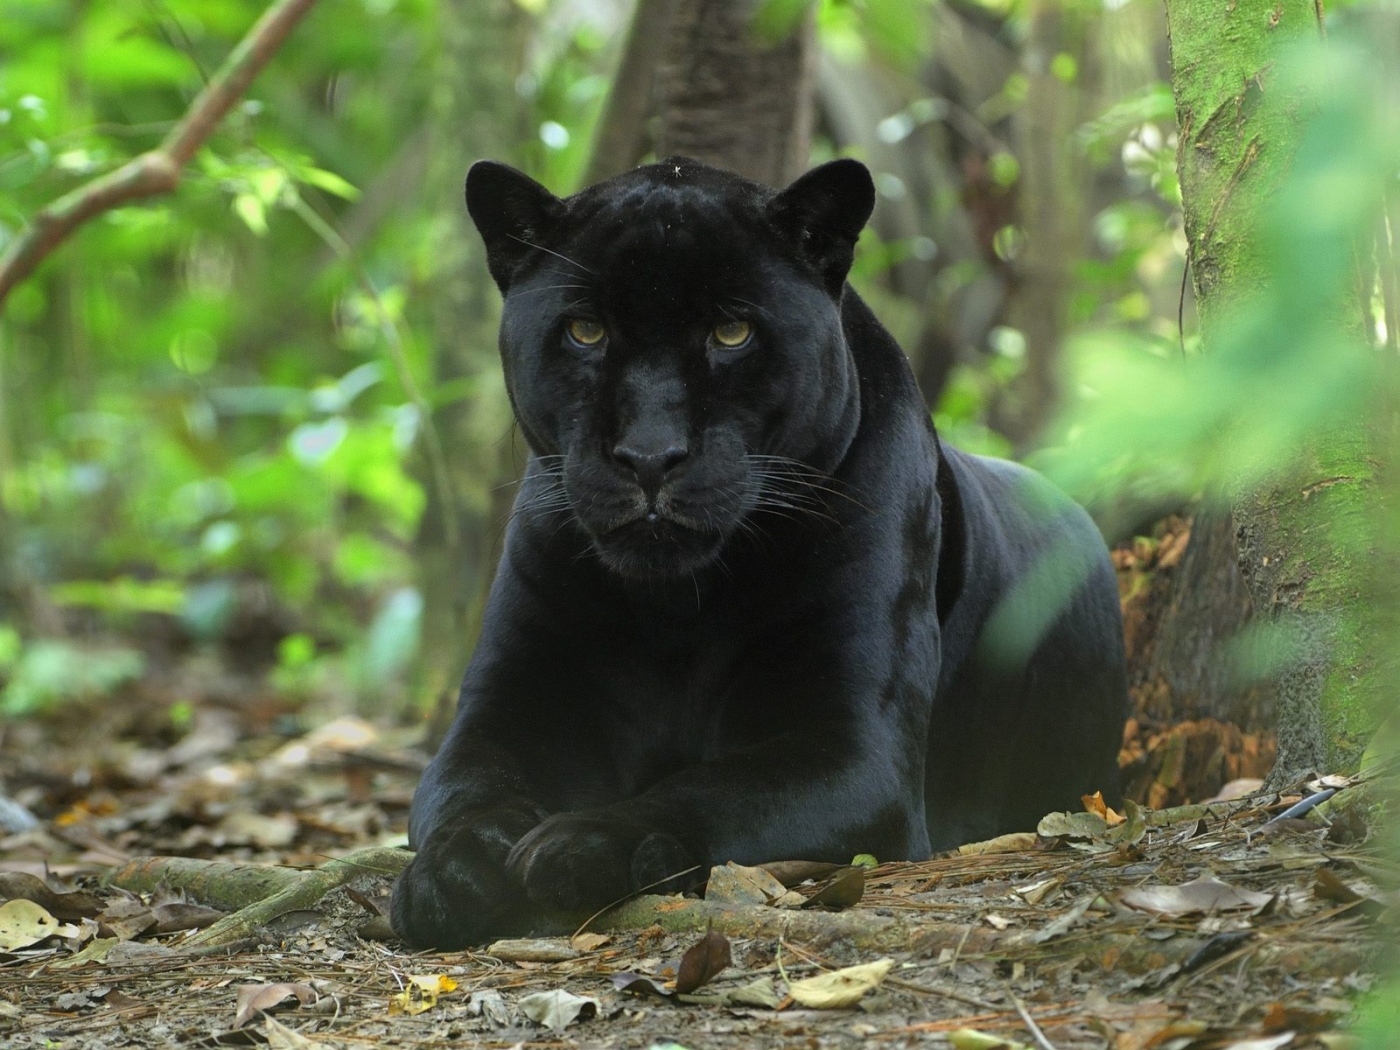 32795 download wallpaper animals, panthers screensavers and pictures for free